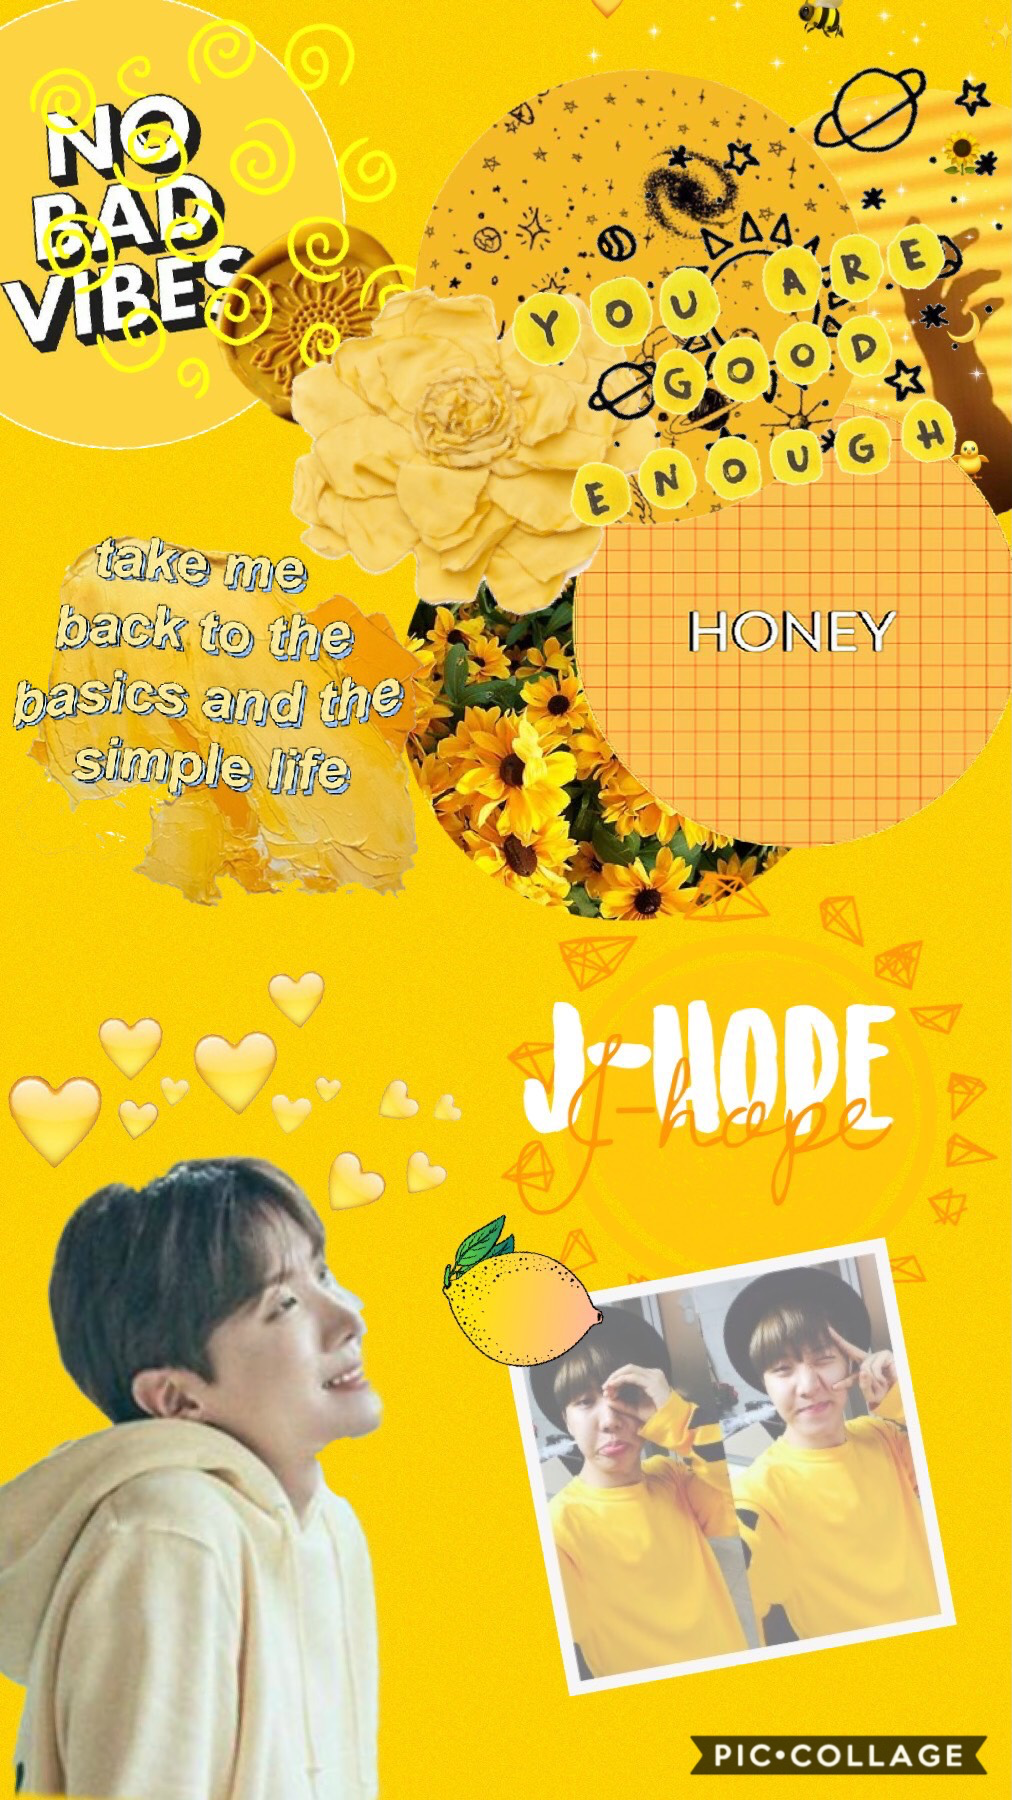 J-hope wallpaper!!!🌼🌻🌞💛💛💛
Free to use on phone!!!